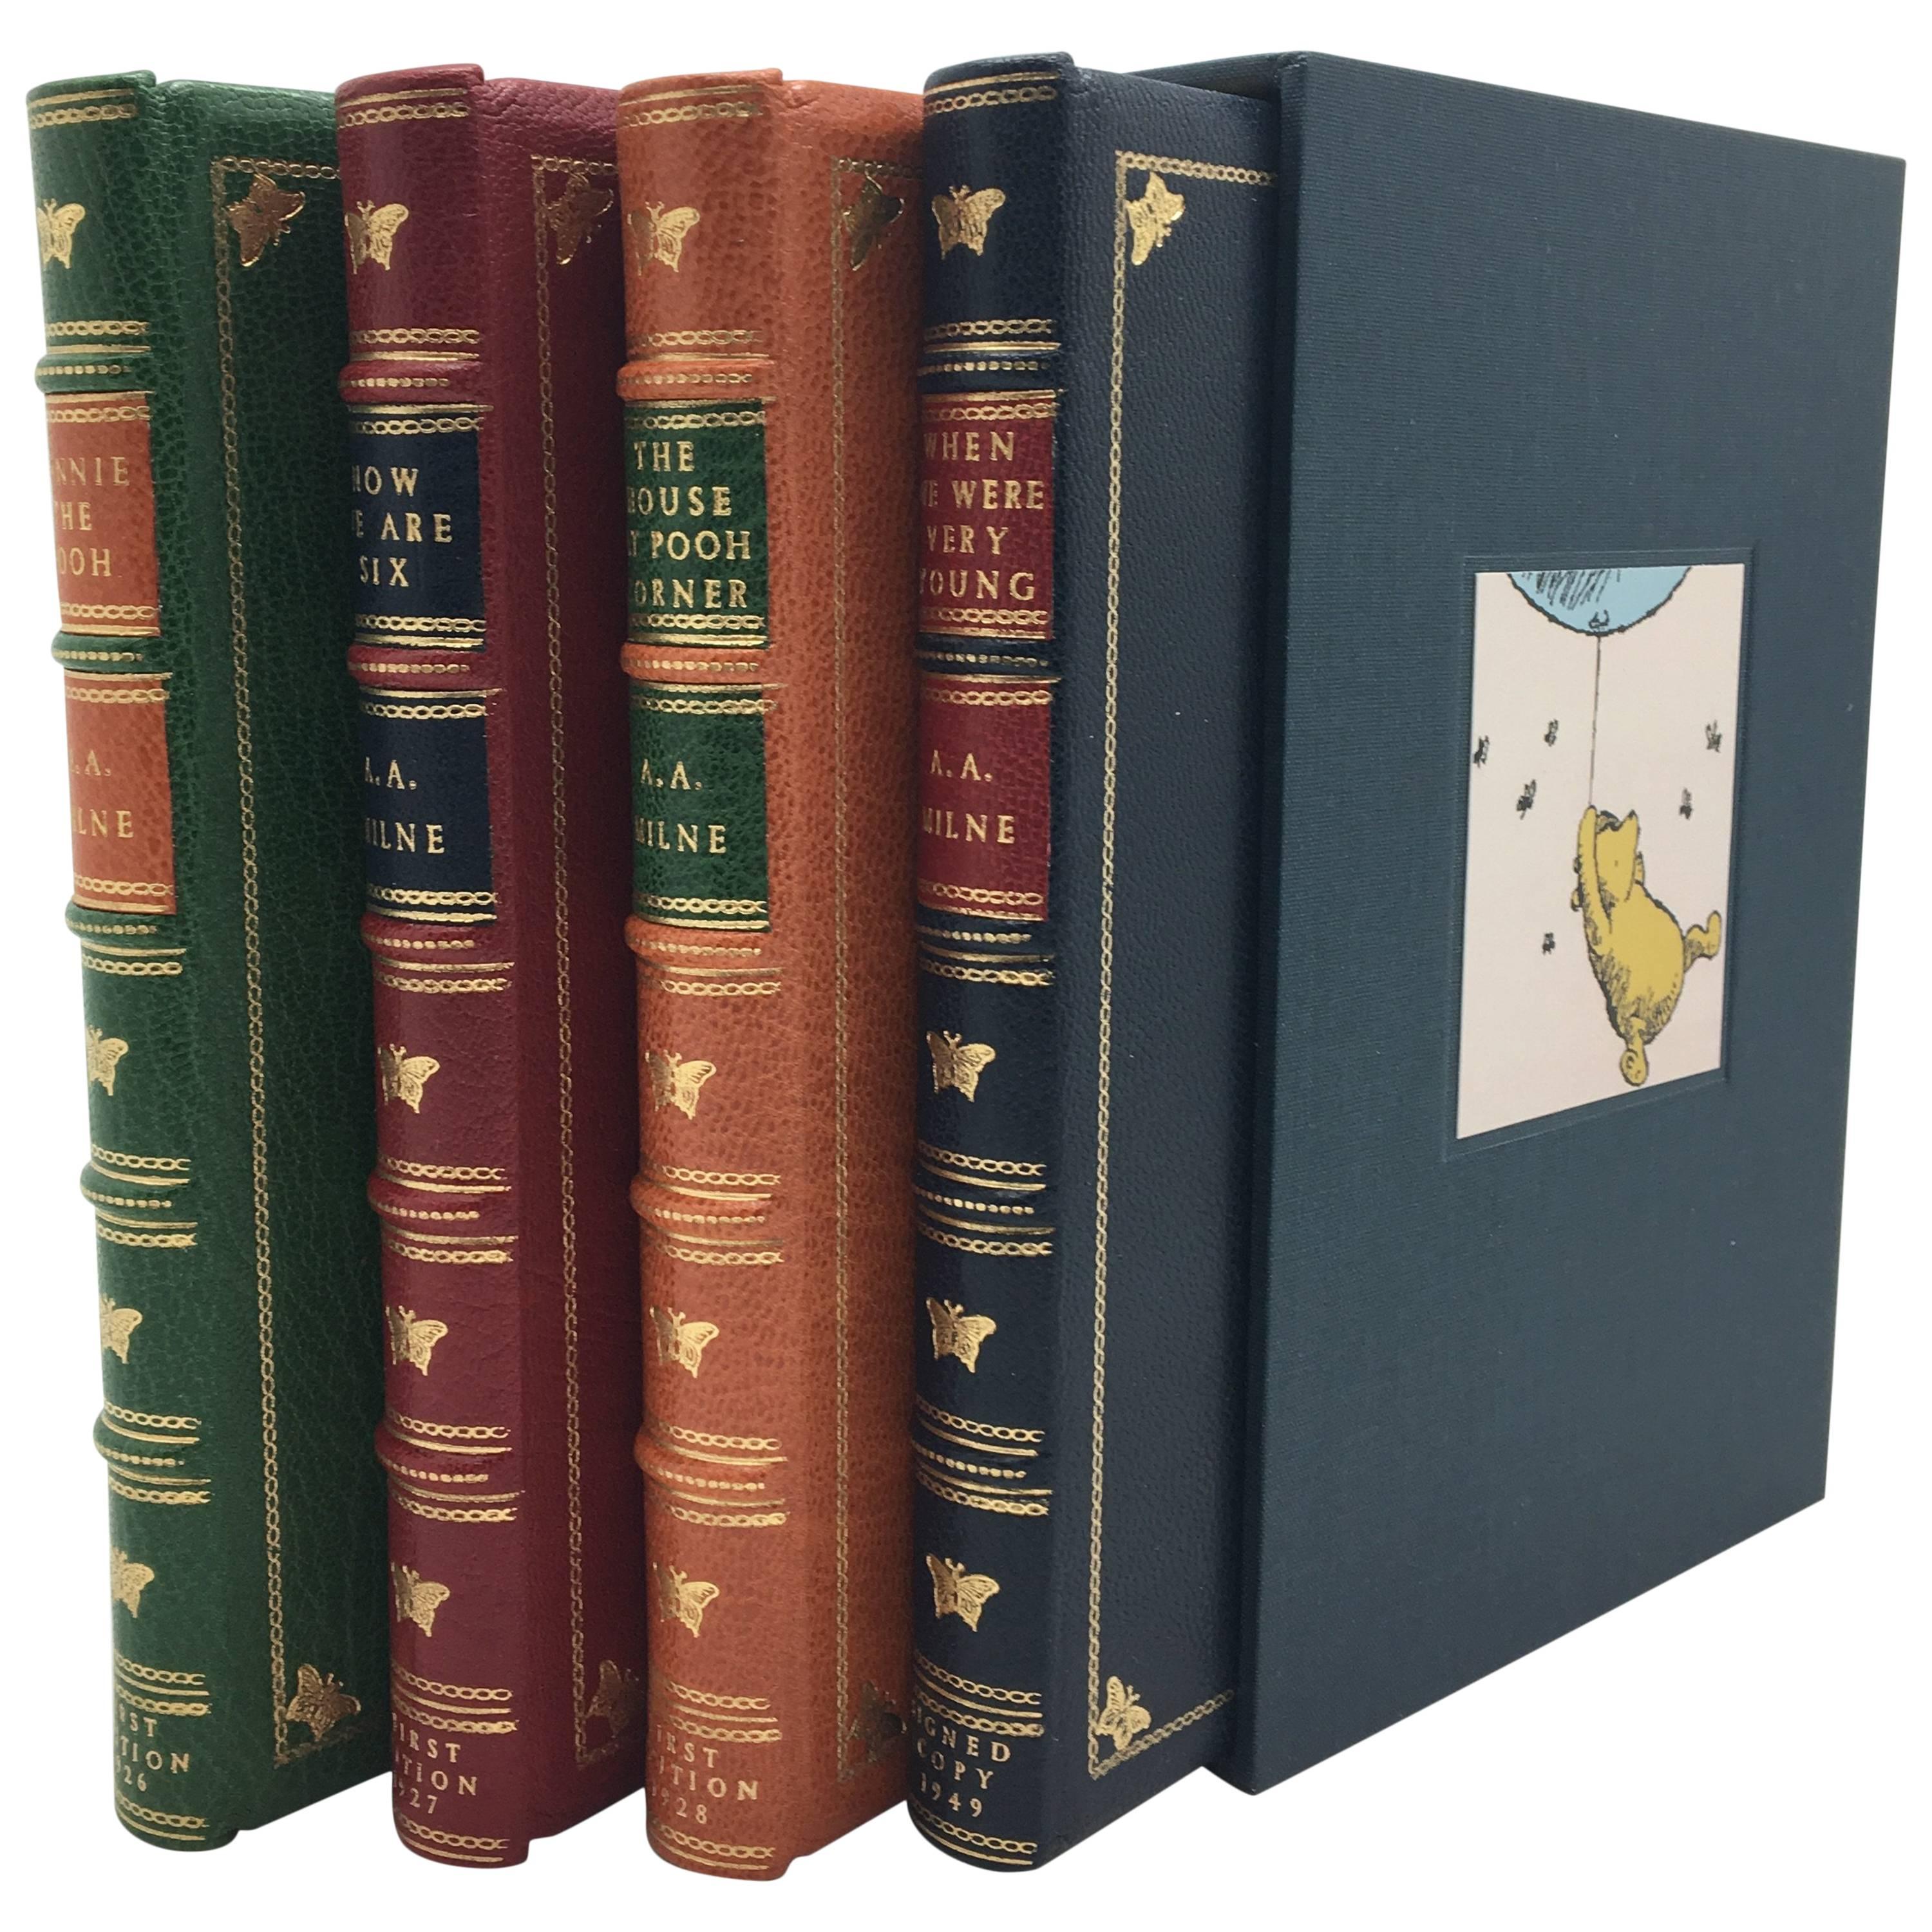 Winnie the Pooh Set, First Editions and Signed Copy by A.A. Milne